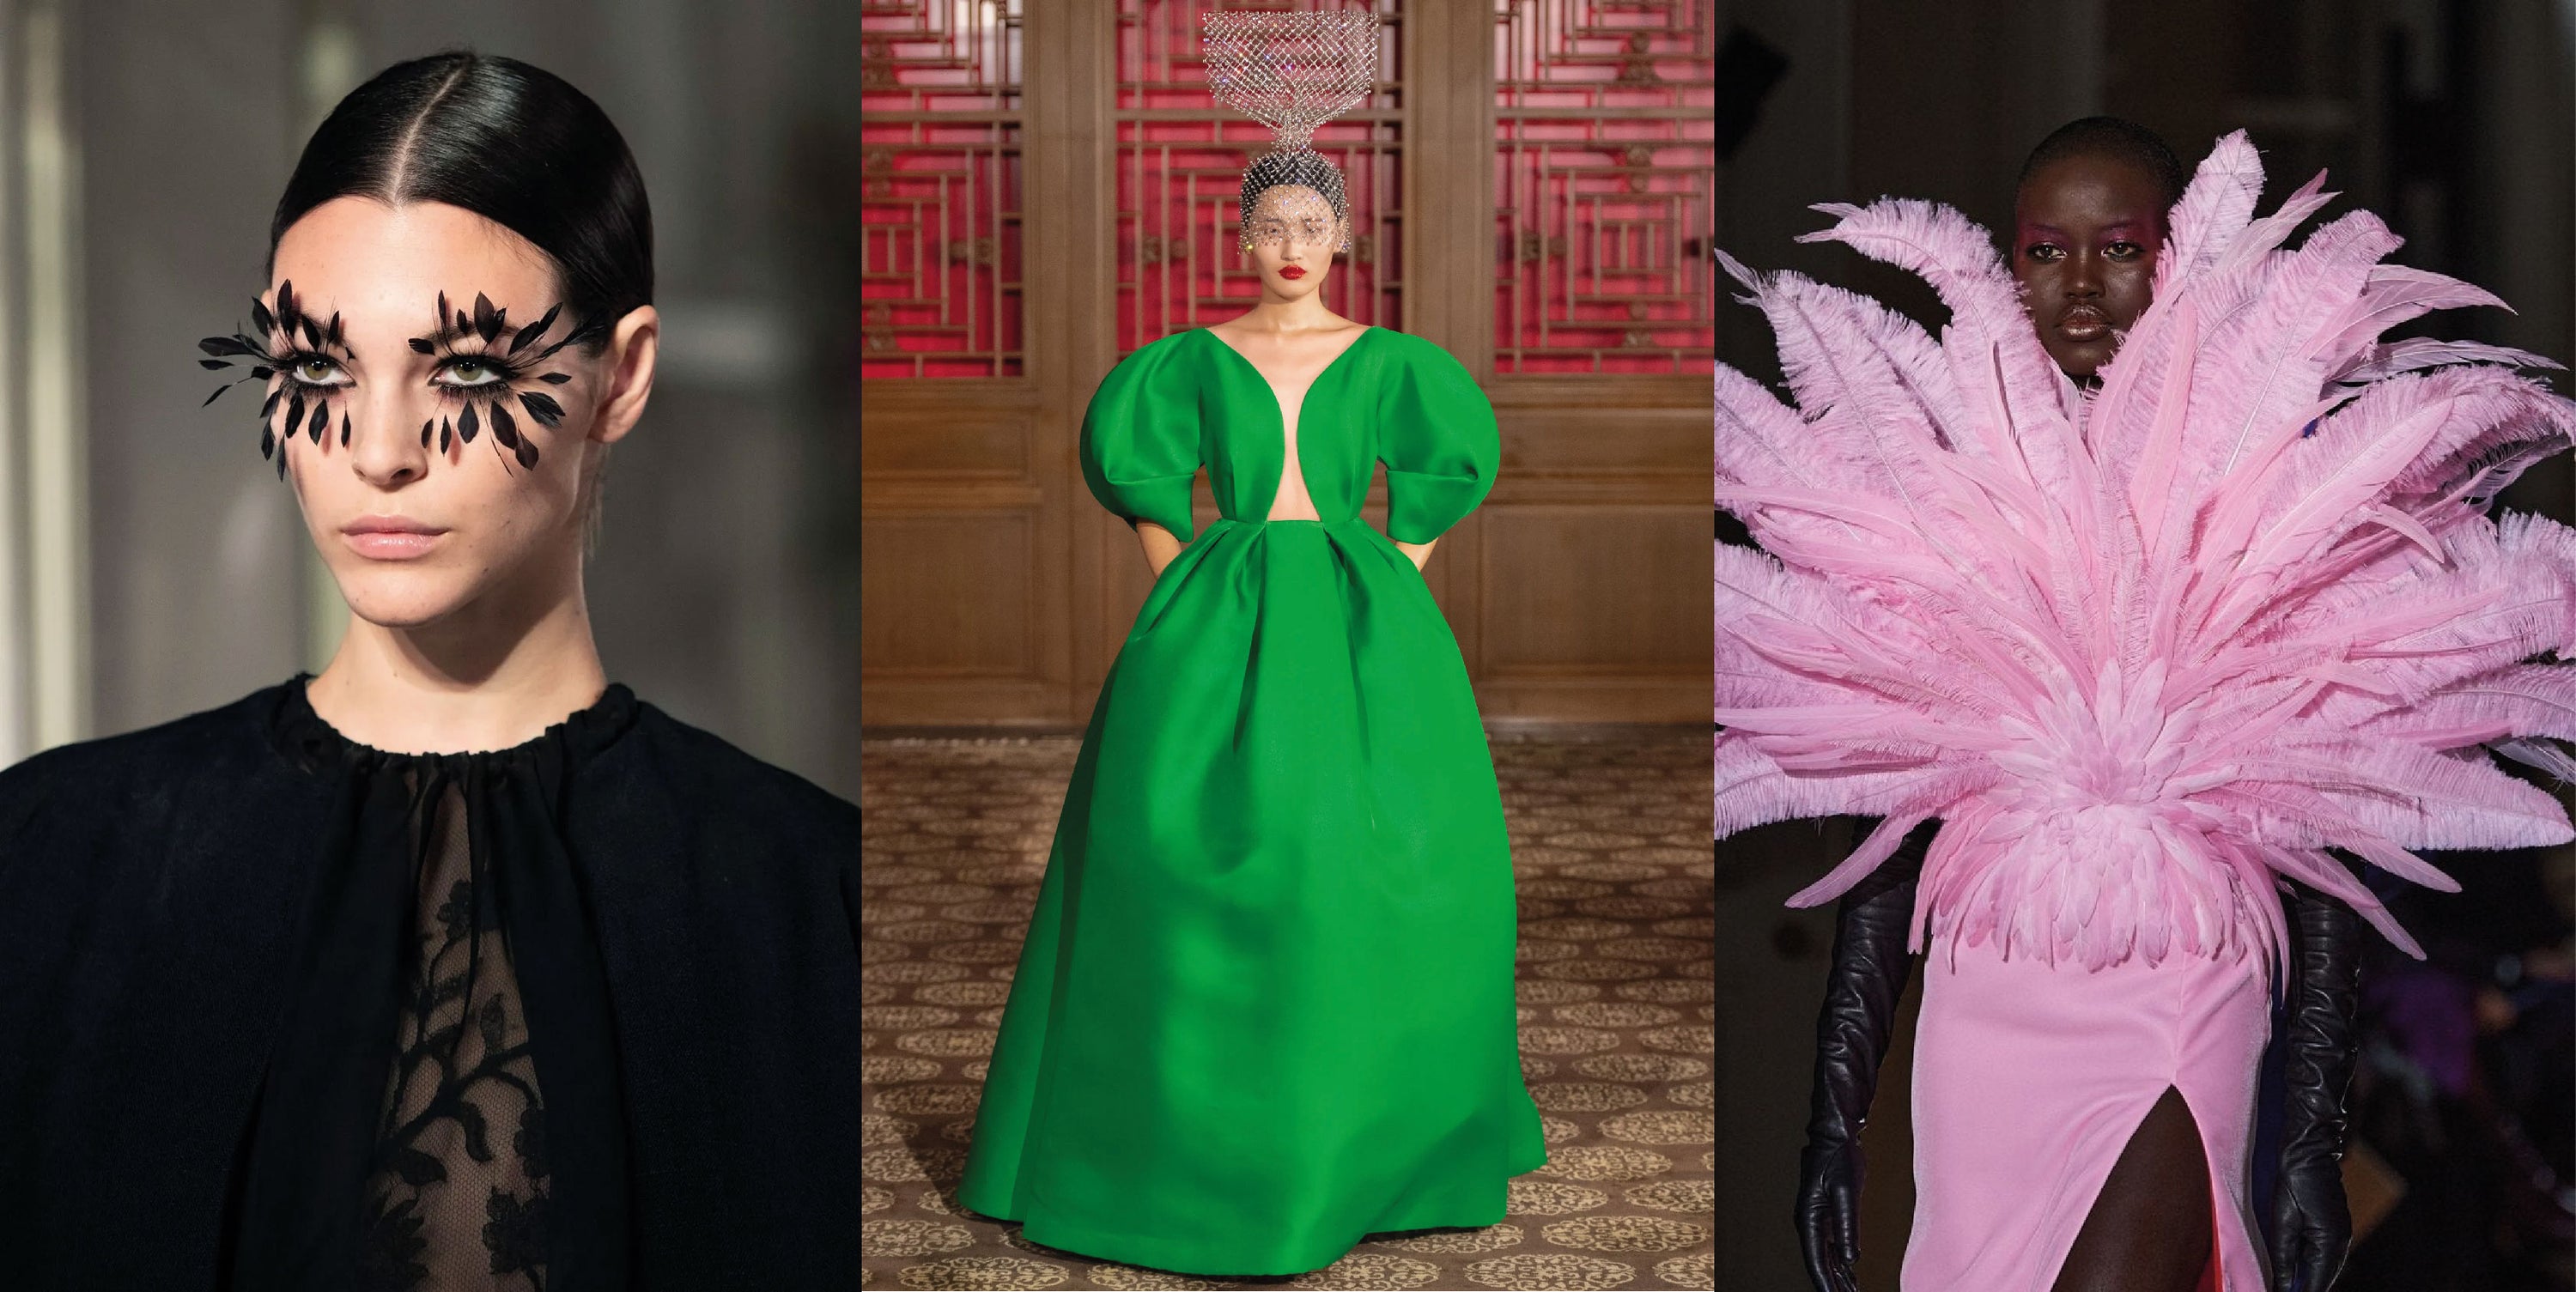 Which was the most ABSURDE look that Pierpaolo Piccioli created for Valentino ?